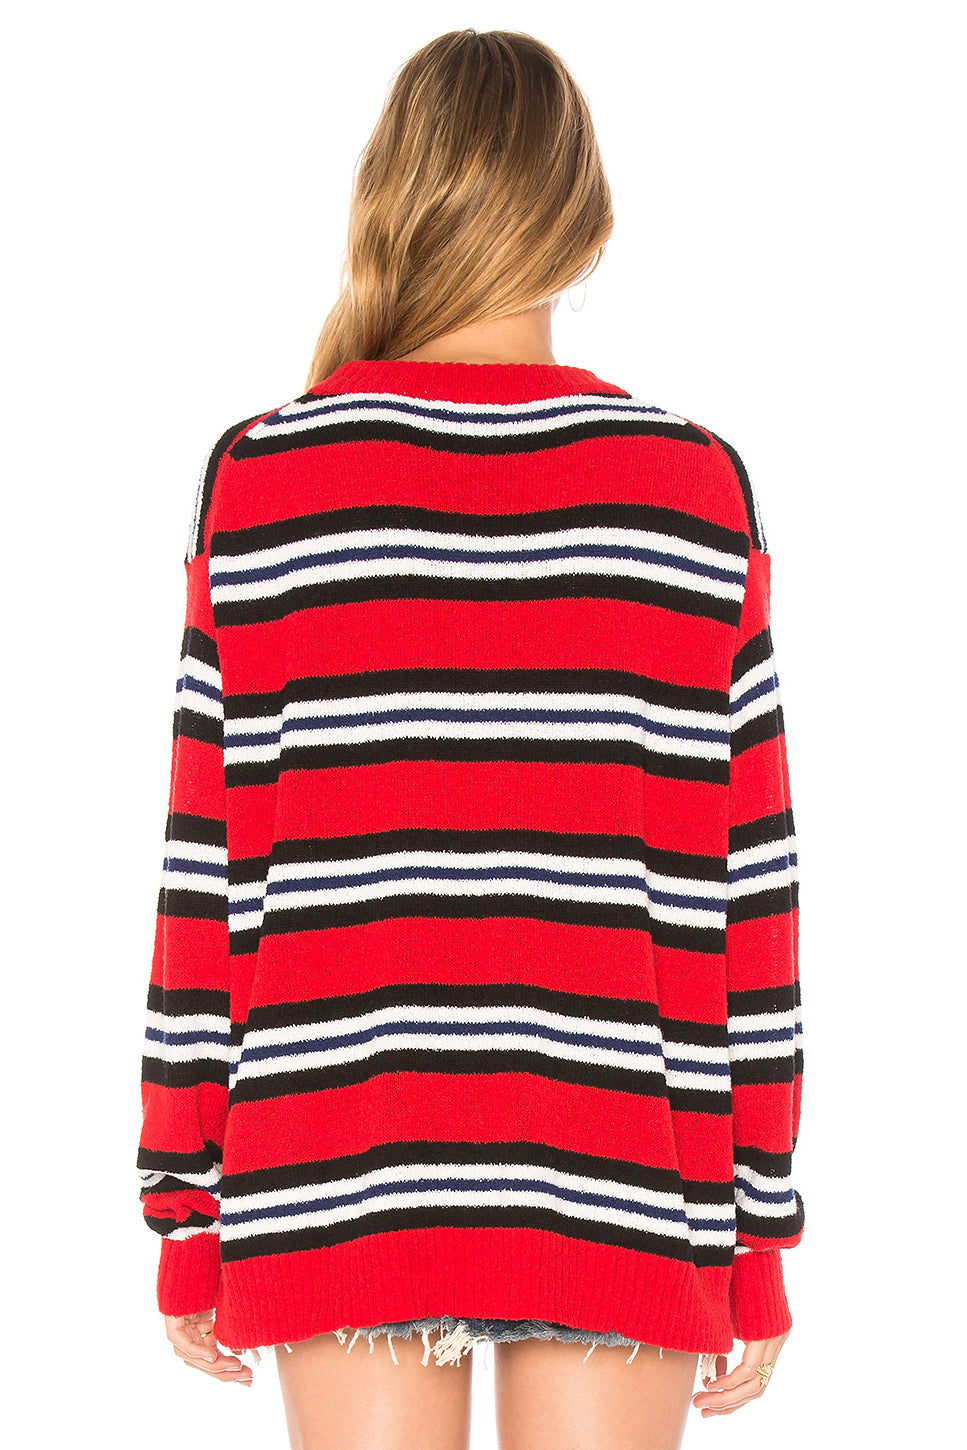 Robbins Sweater in RED STRIPE